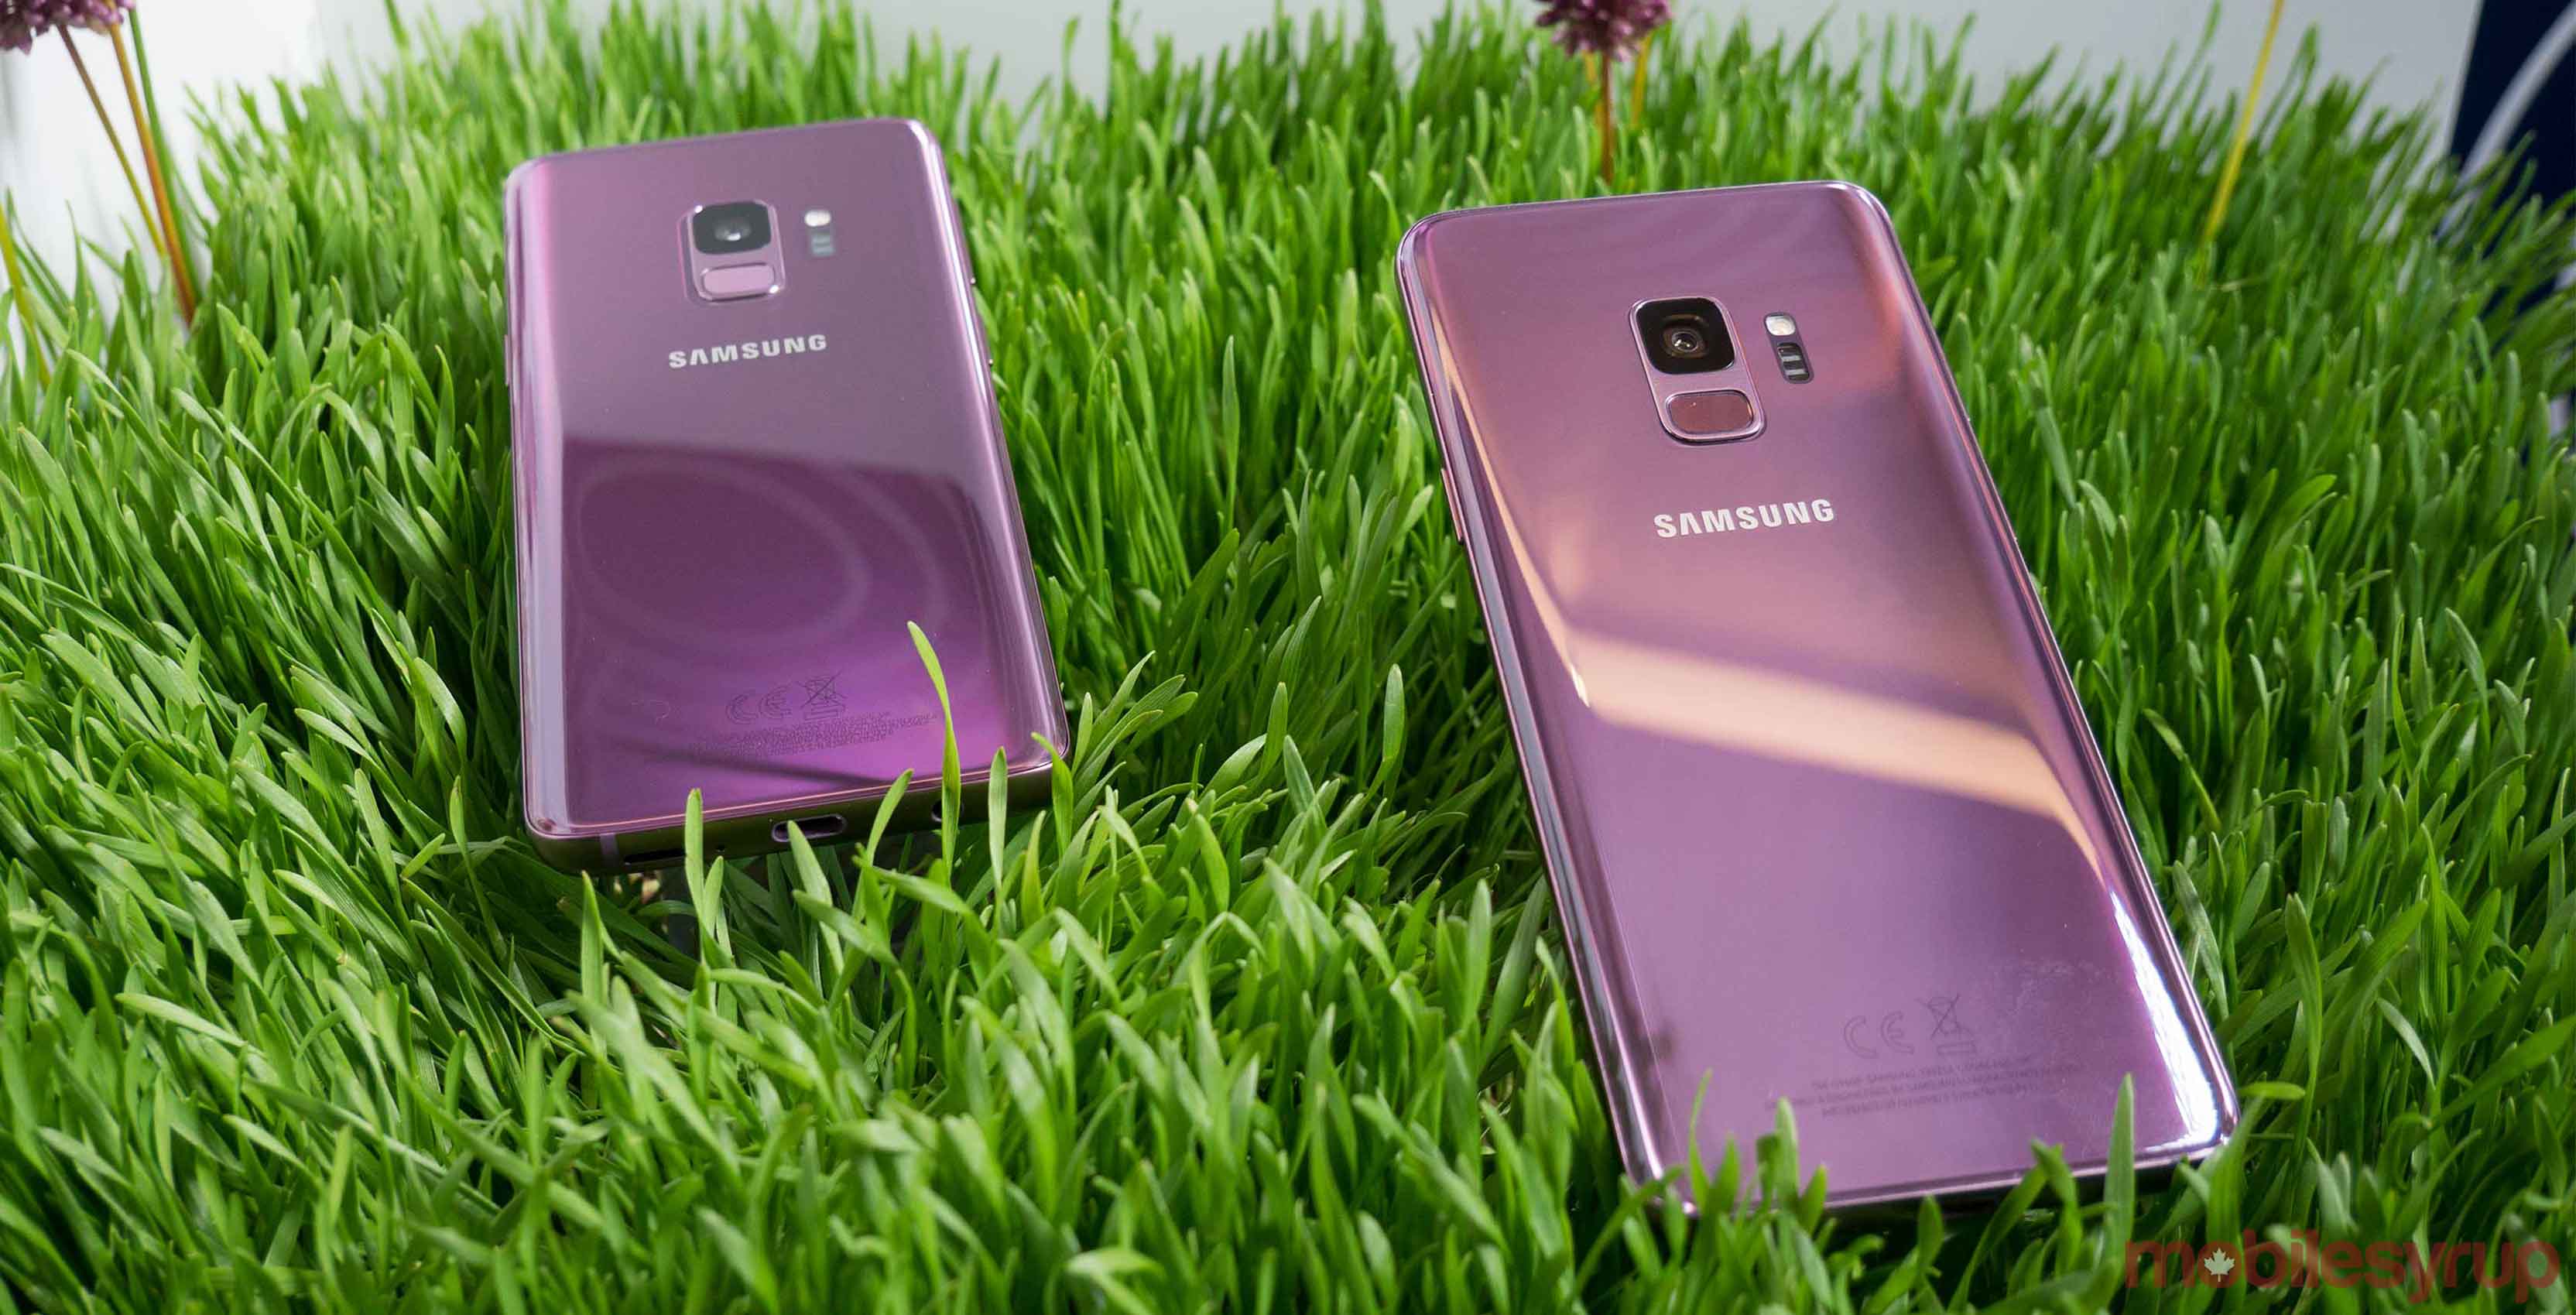 The Galaxy S9 in pink